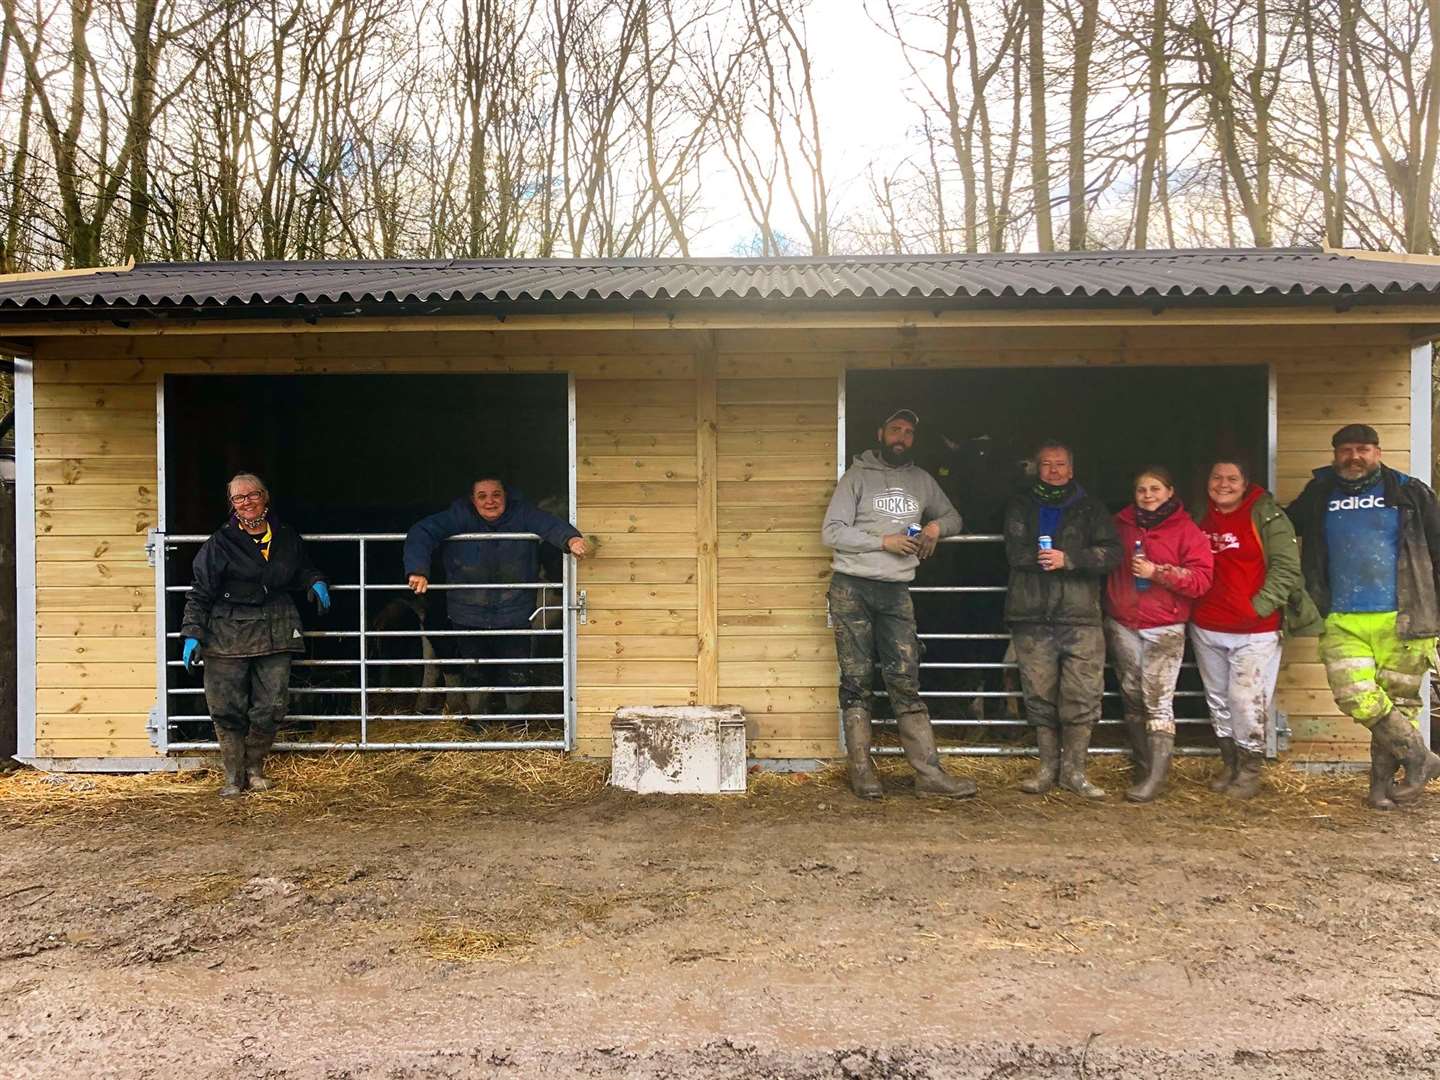 Volunteers helped Happy Pants Ranch animal sanctuary relocate to a new 20-acre site in Iwade Road, Newington - an operation which included moving 350 animals including goats and pigs